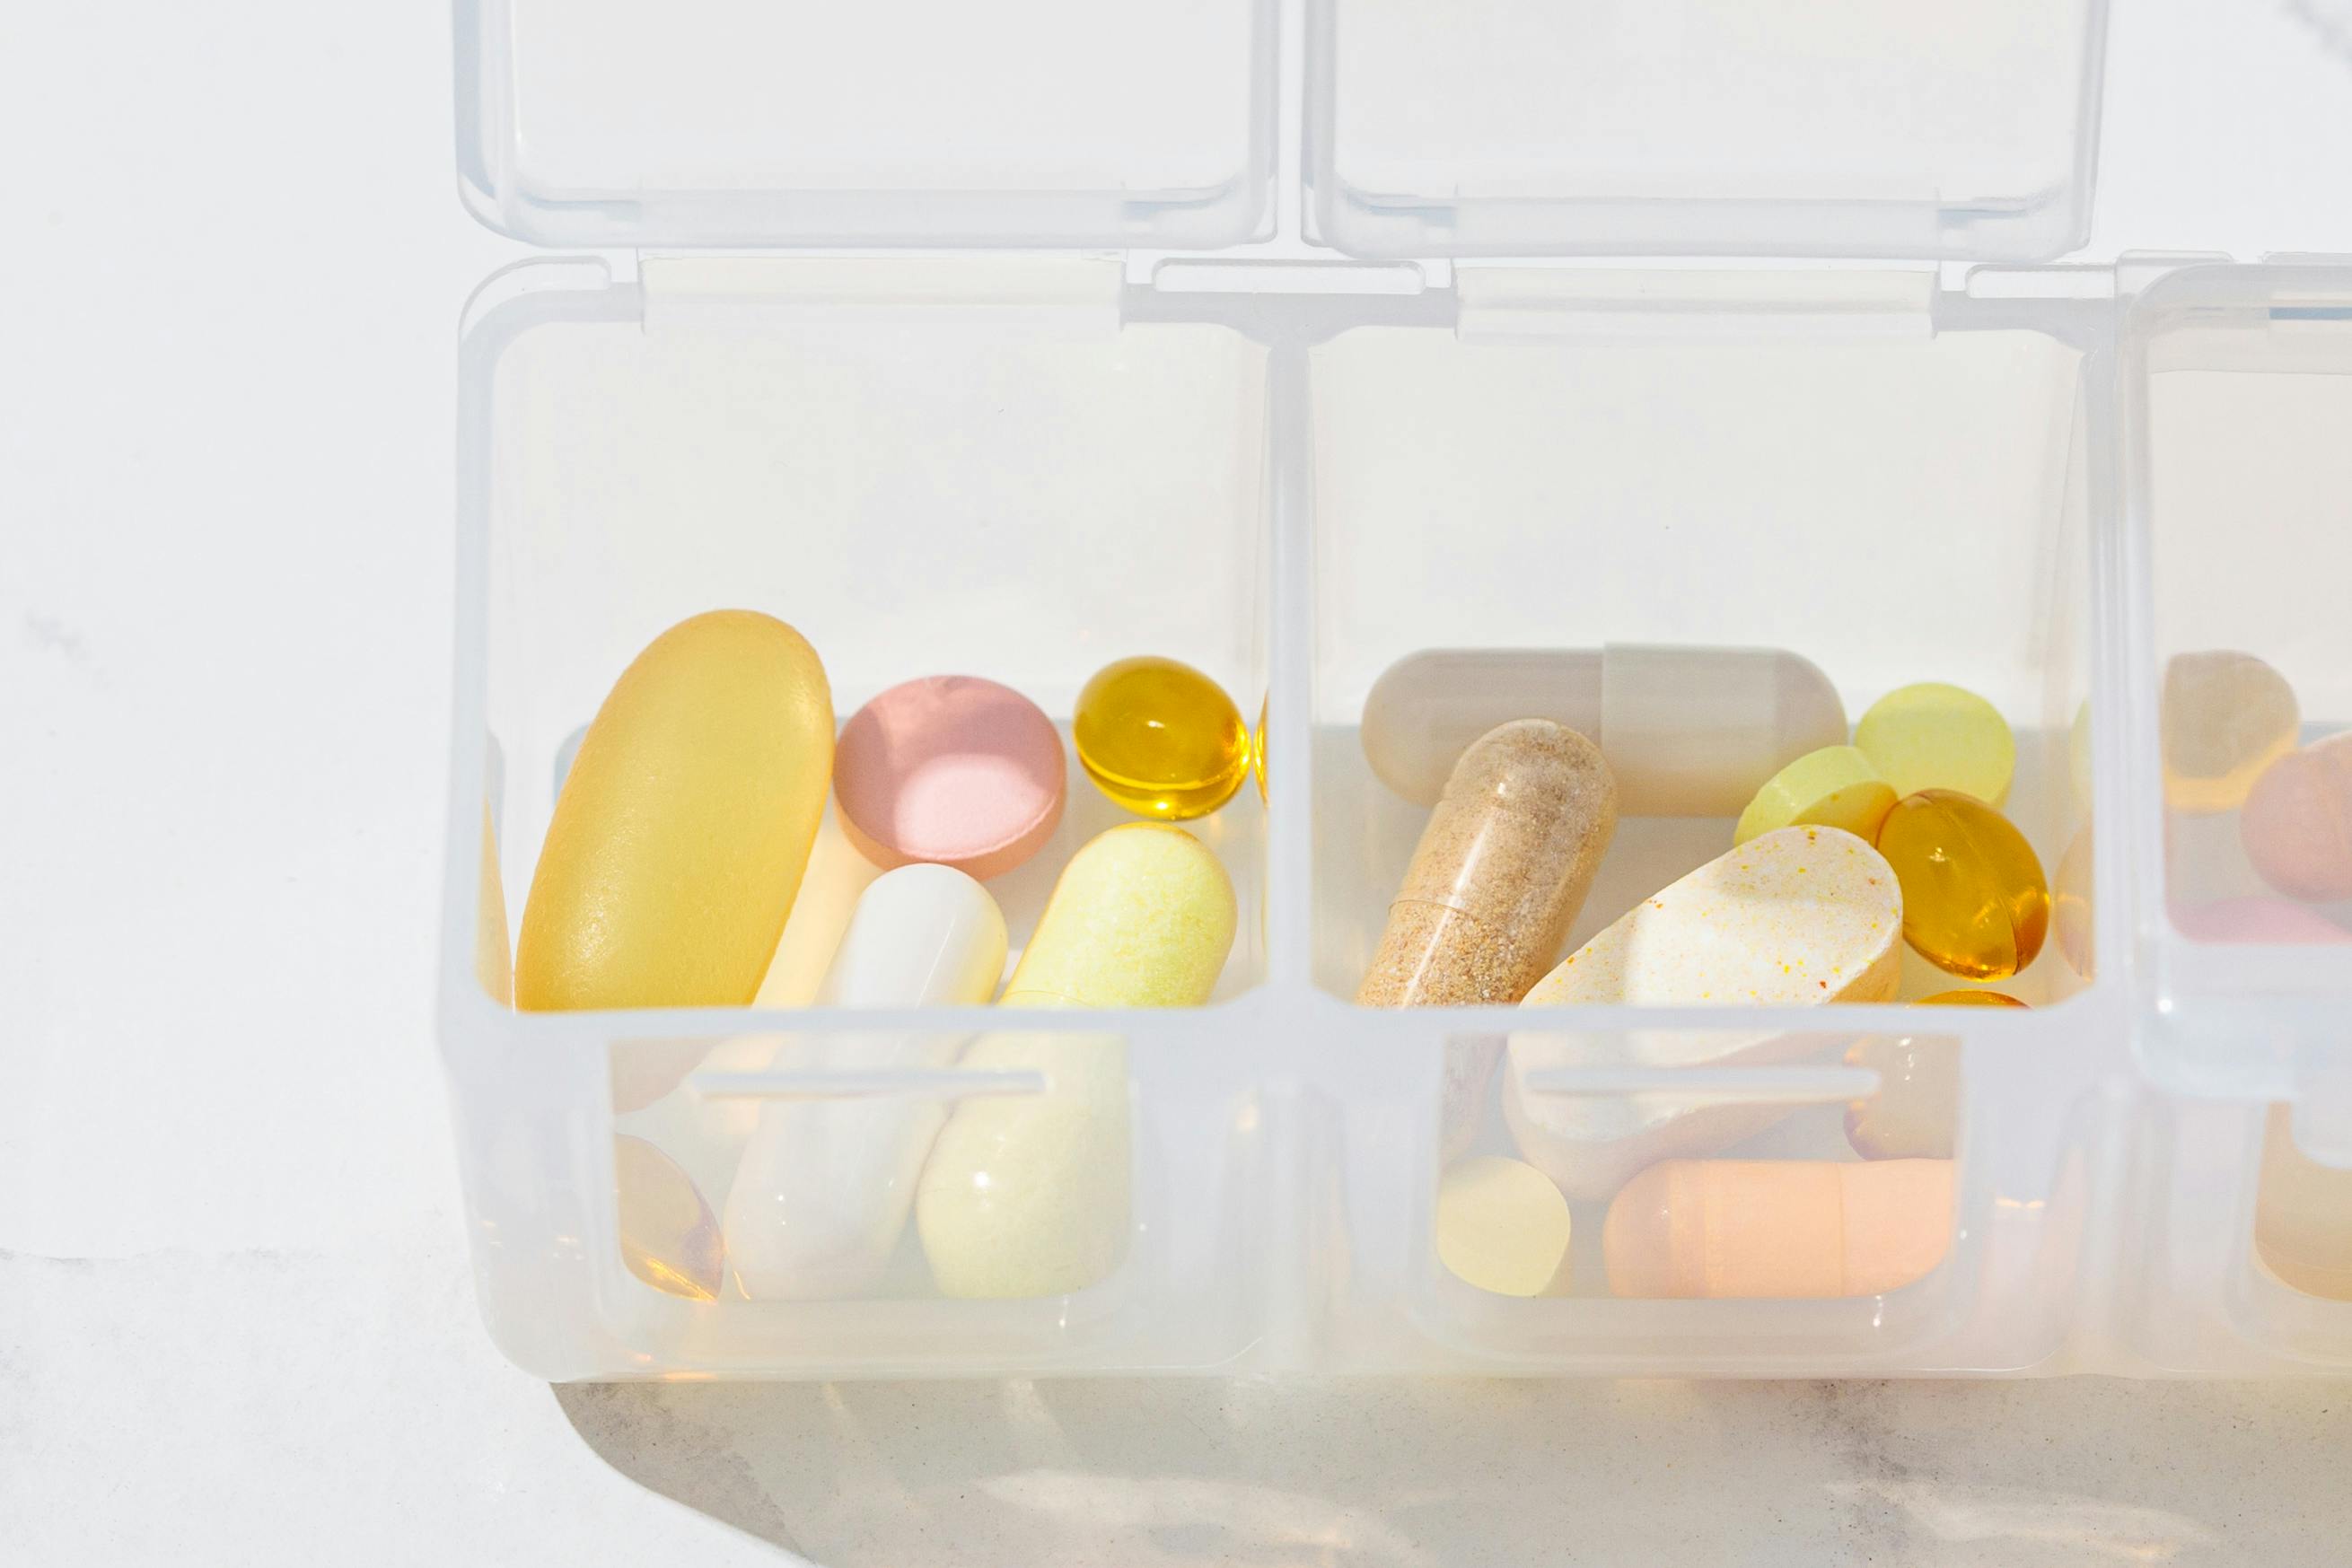 Are pill organizers really safe?